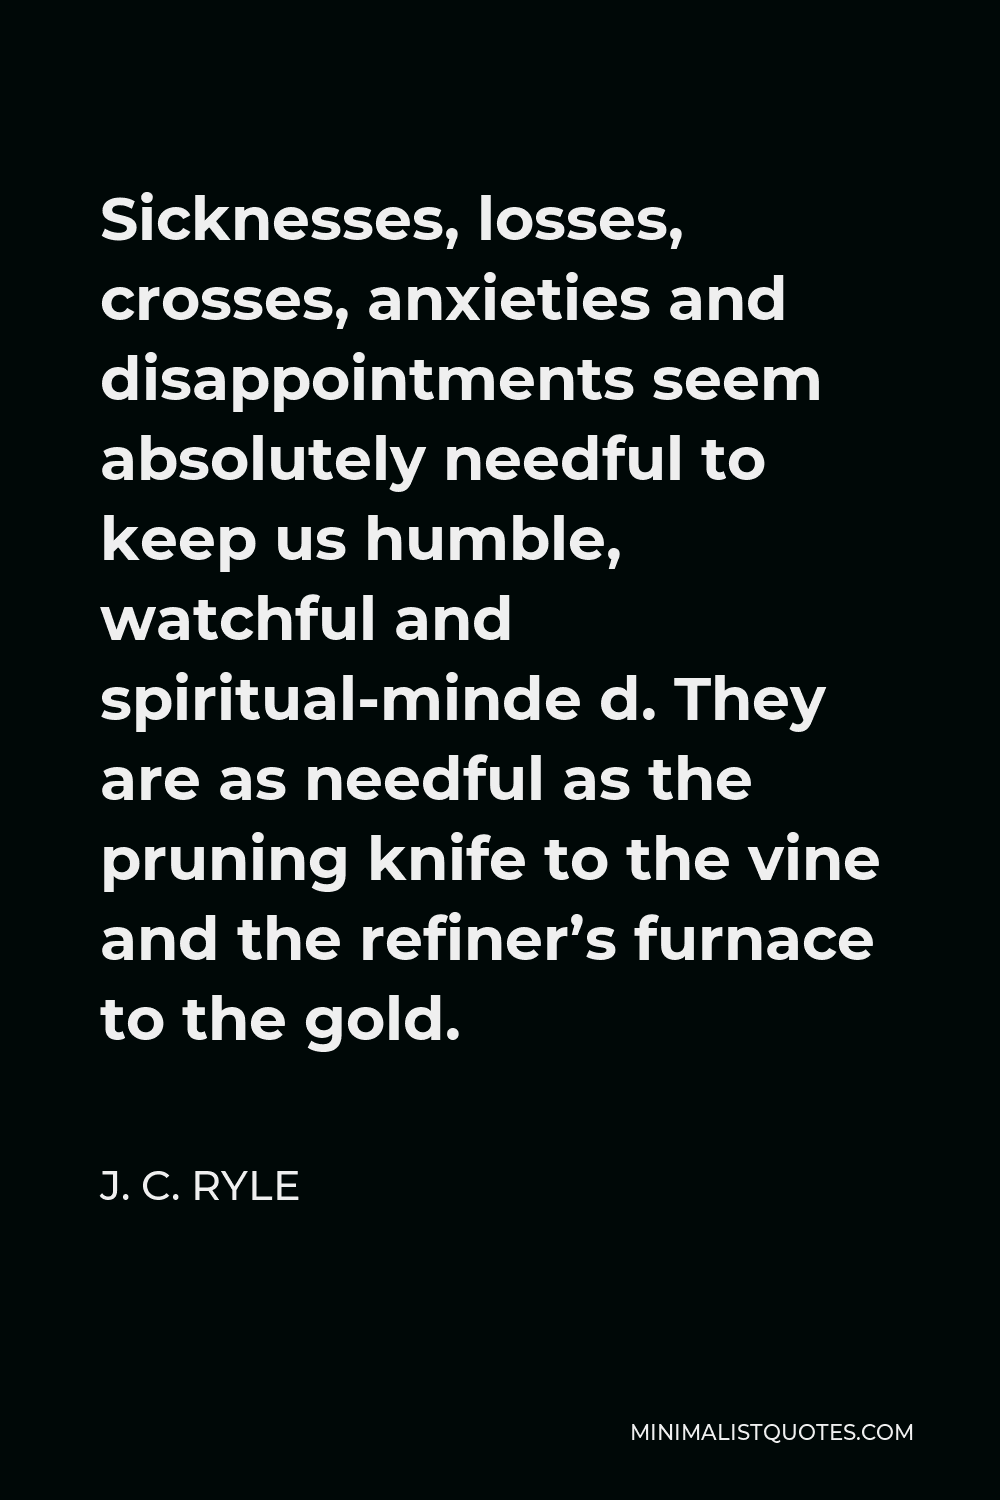 J. C. Ryle Quote - Sicknesses, losses, crosses, anxieties and disappointments seem absolutely needful to keep us humble, watchful and spiritual-minde d. They are as needful as the pruning knife to the vine and the refiner’s furnace to the gold.